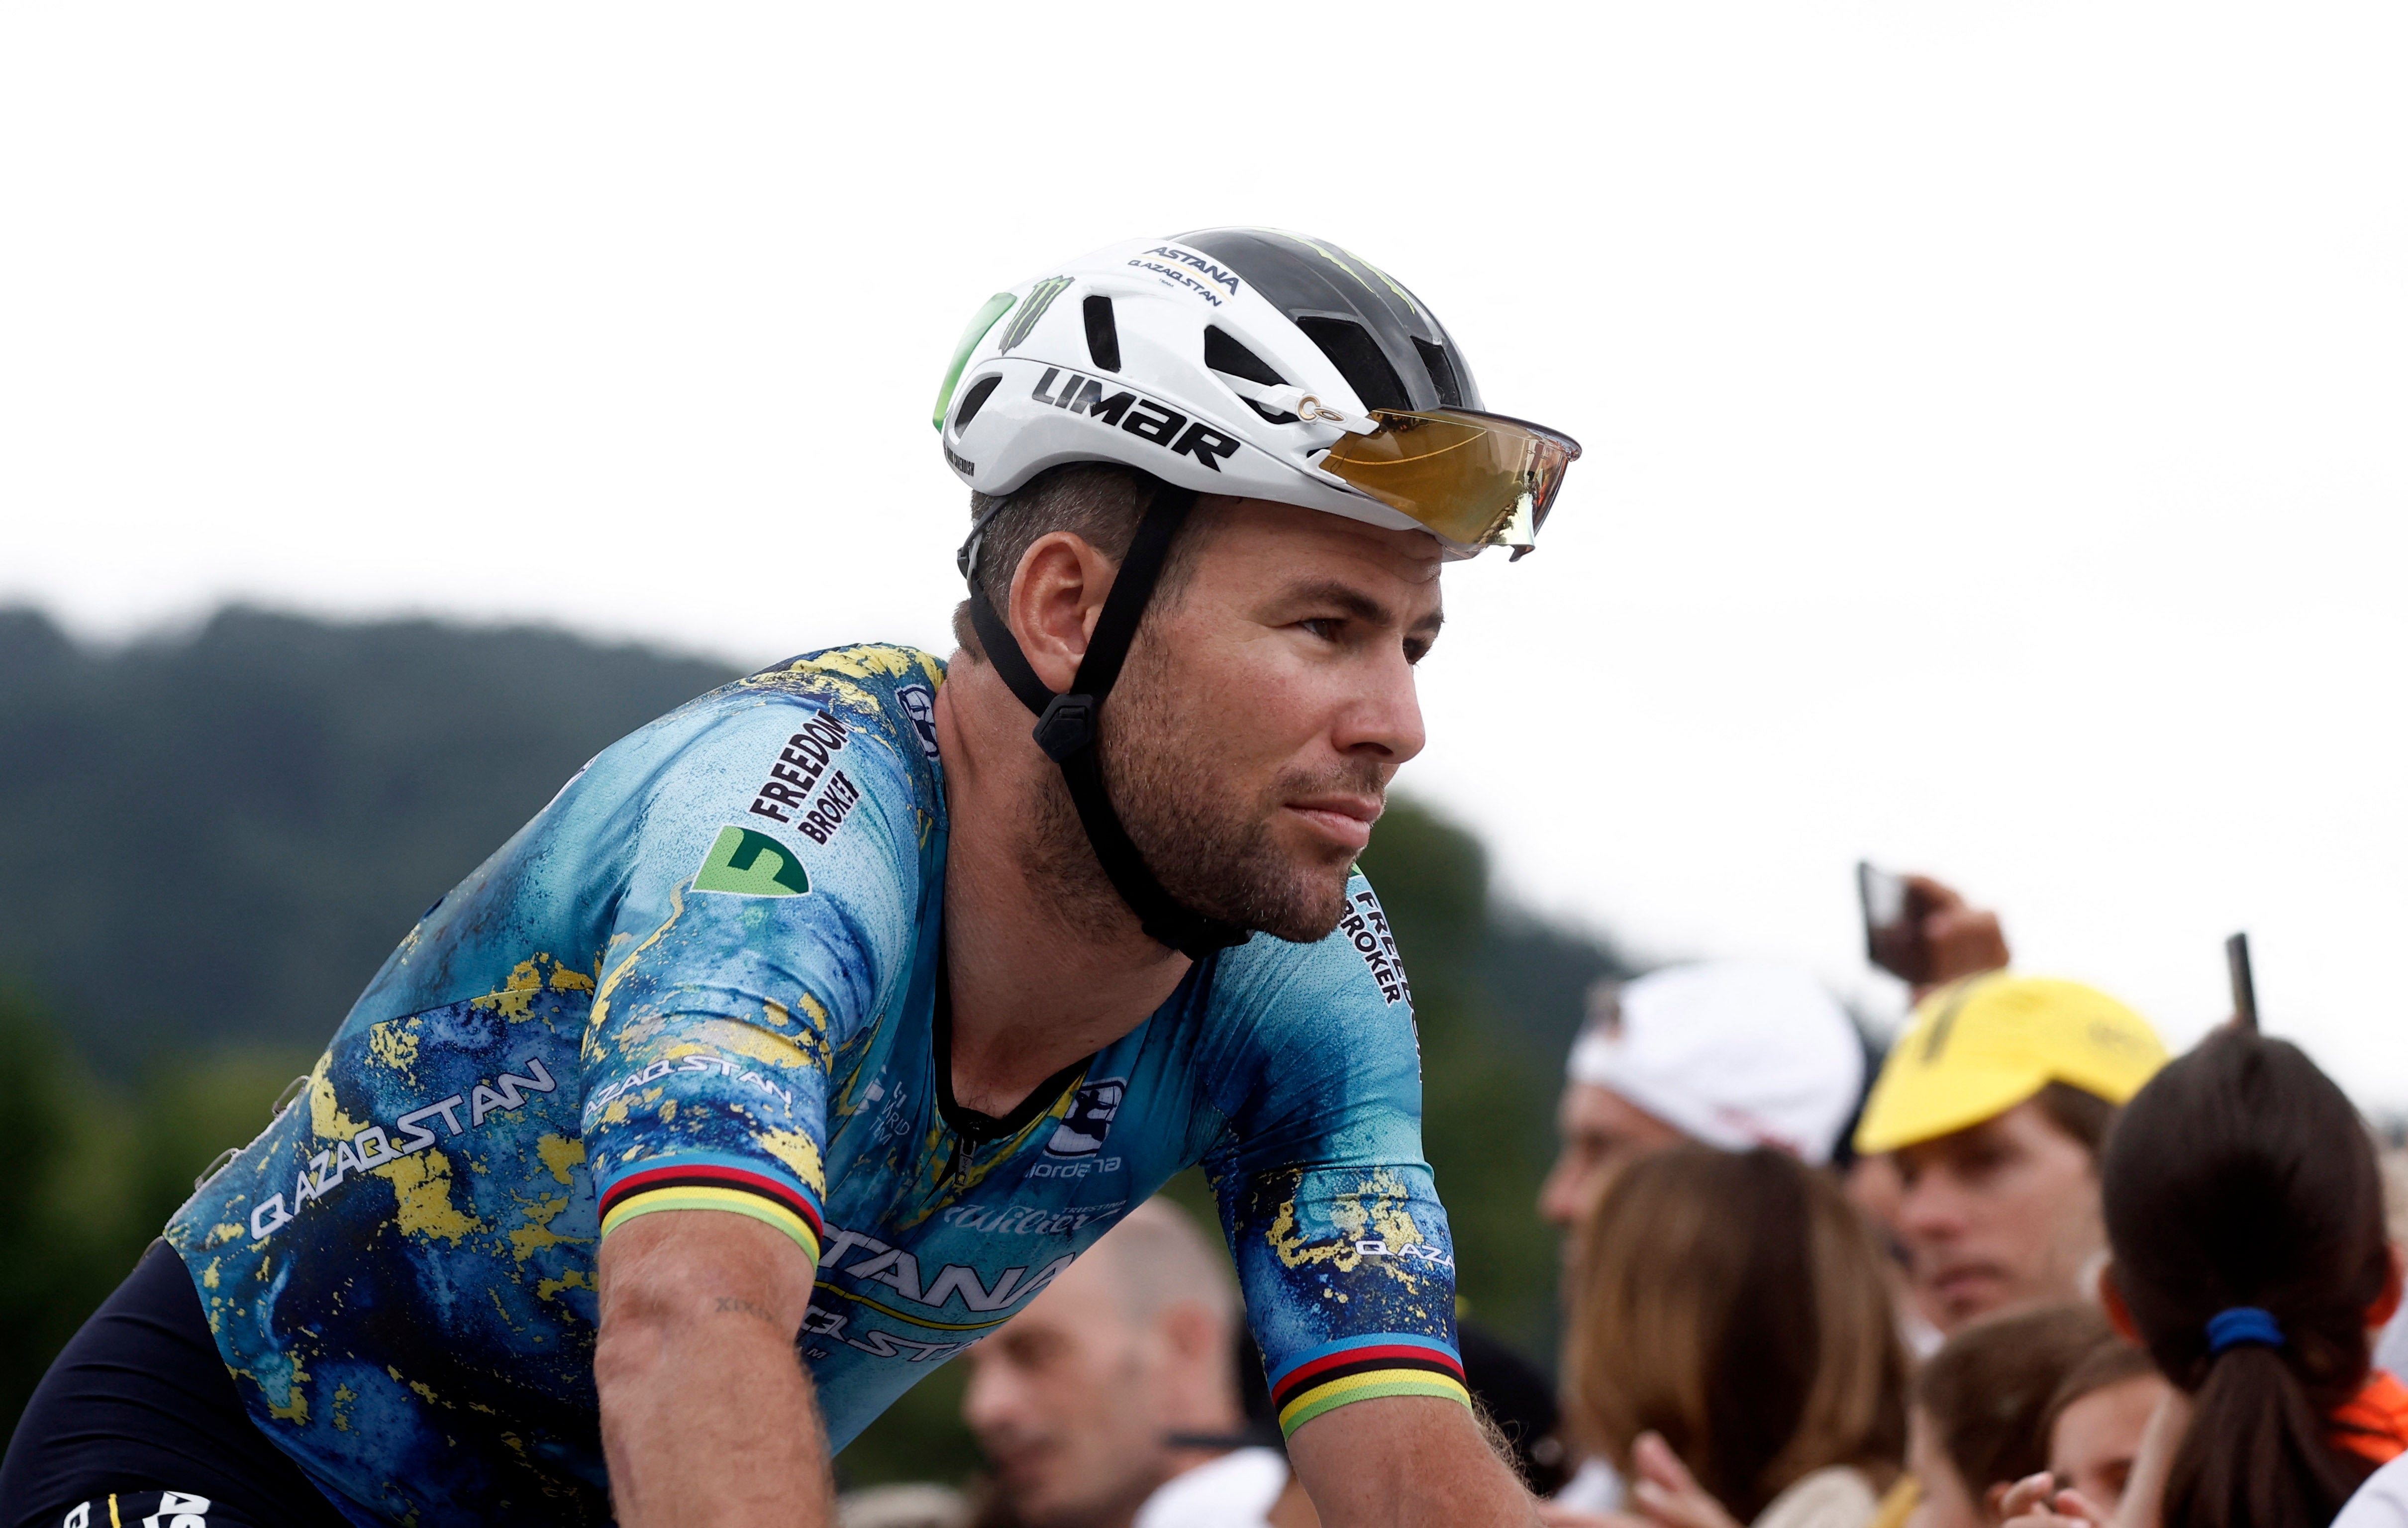 Mark Cavendish is taking what is expected to be one last crack at the Tour de France